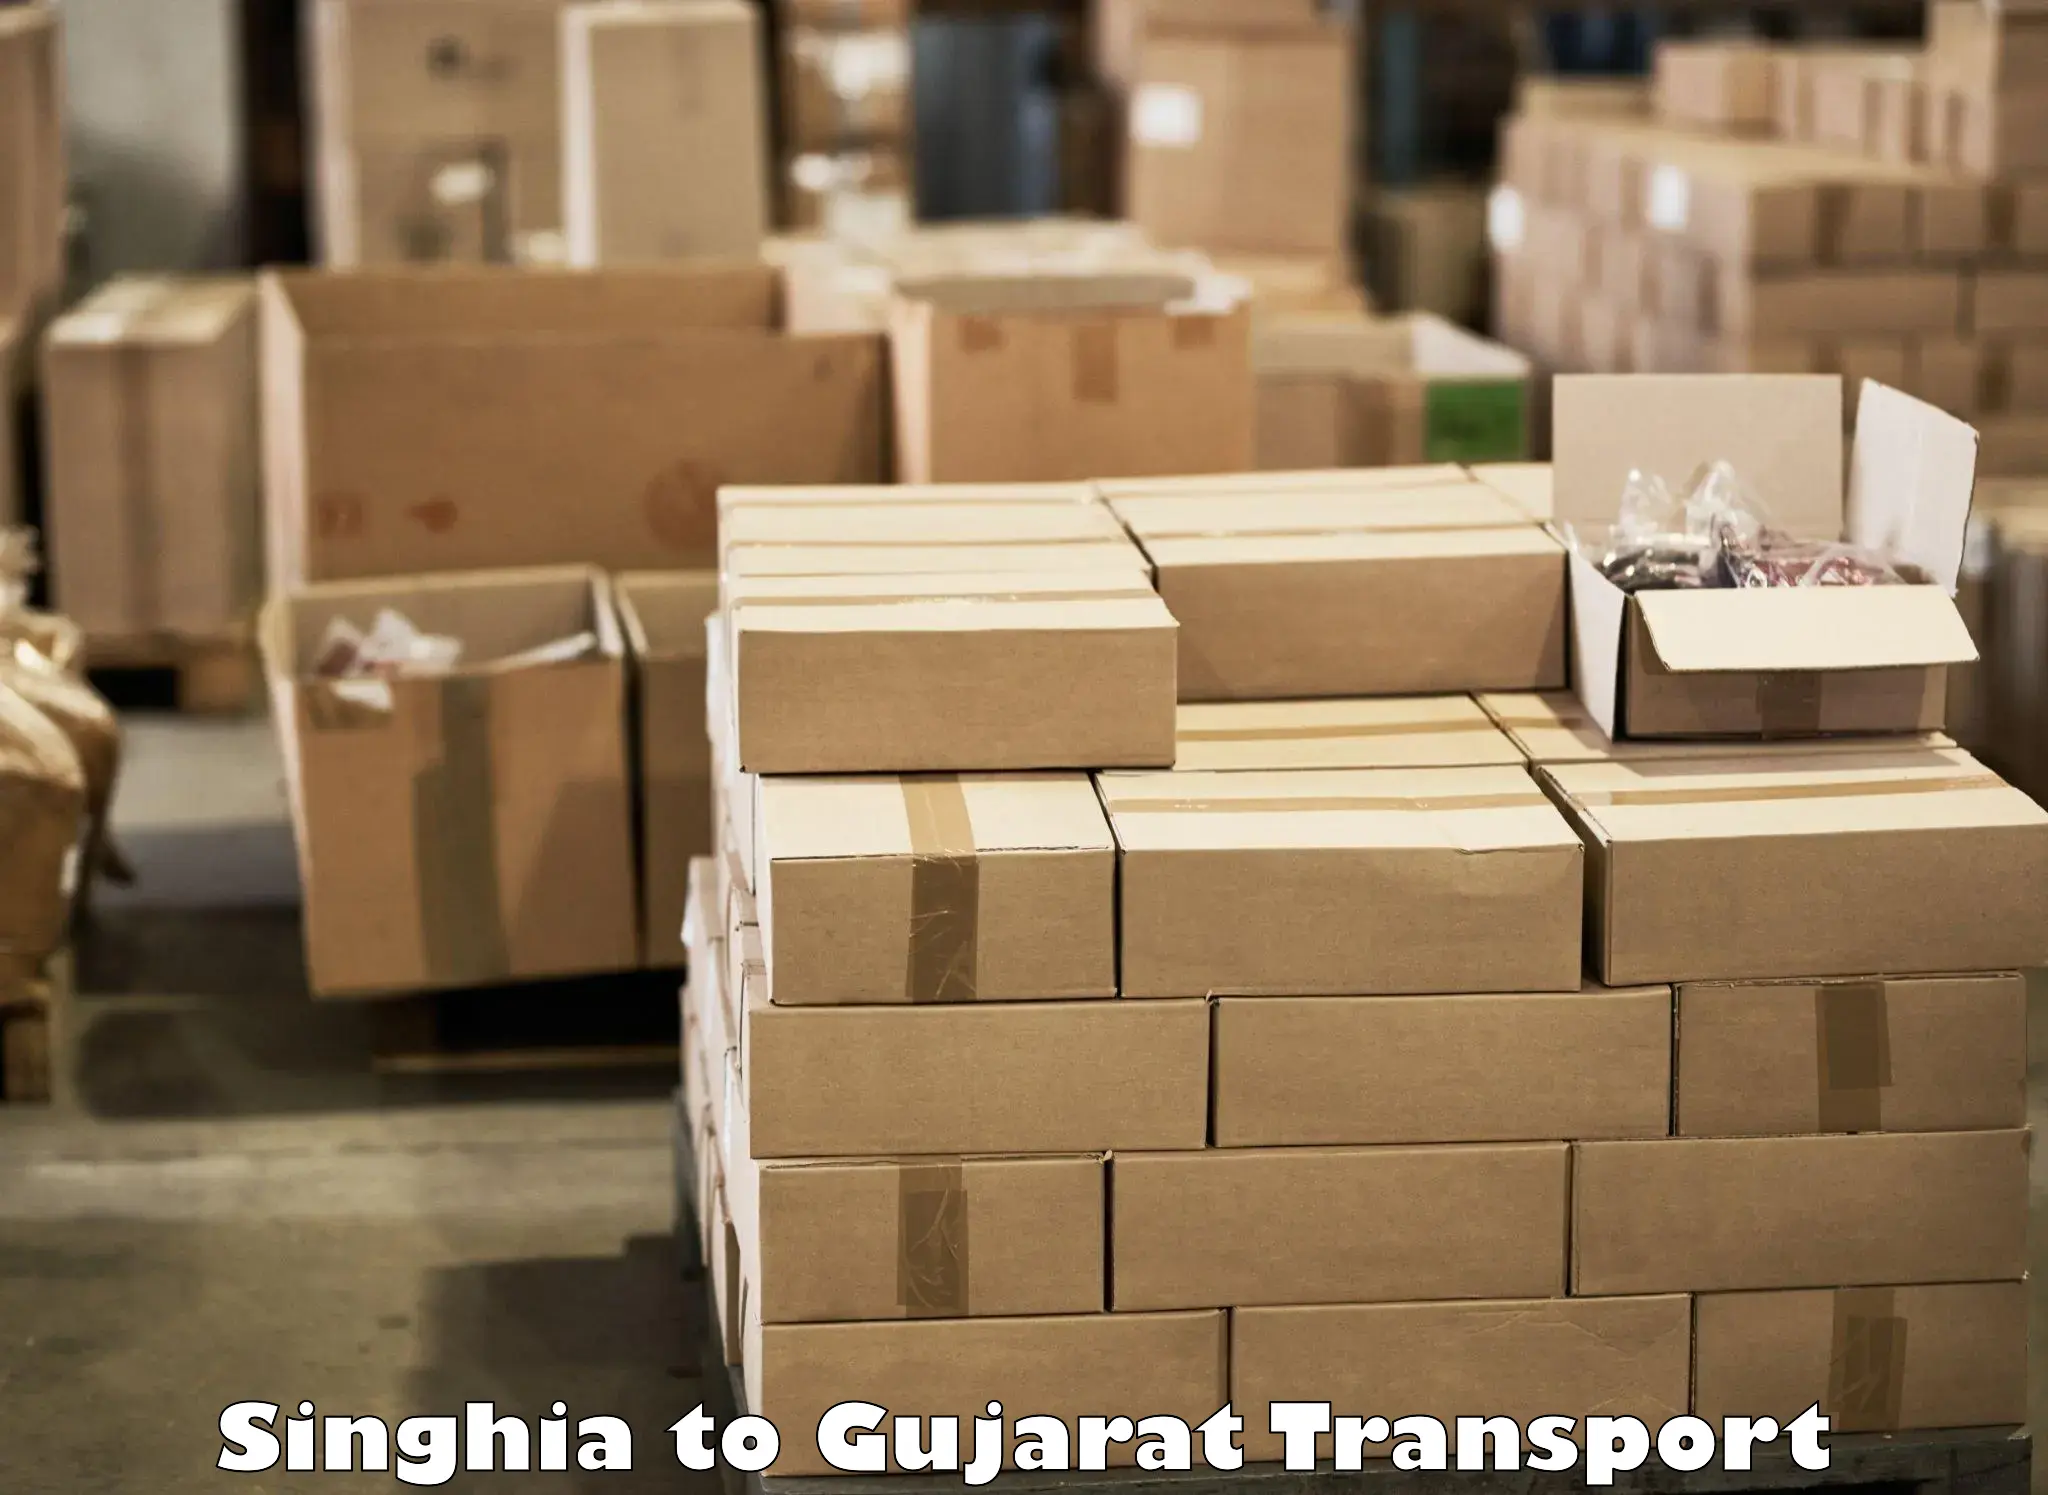 Air freight transport services Singhia to Ankleshwar